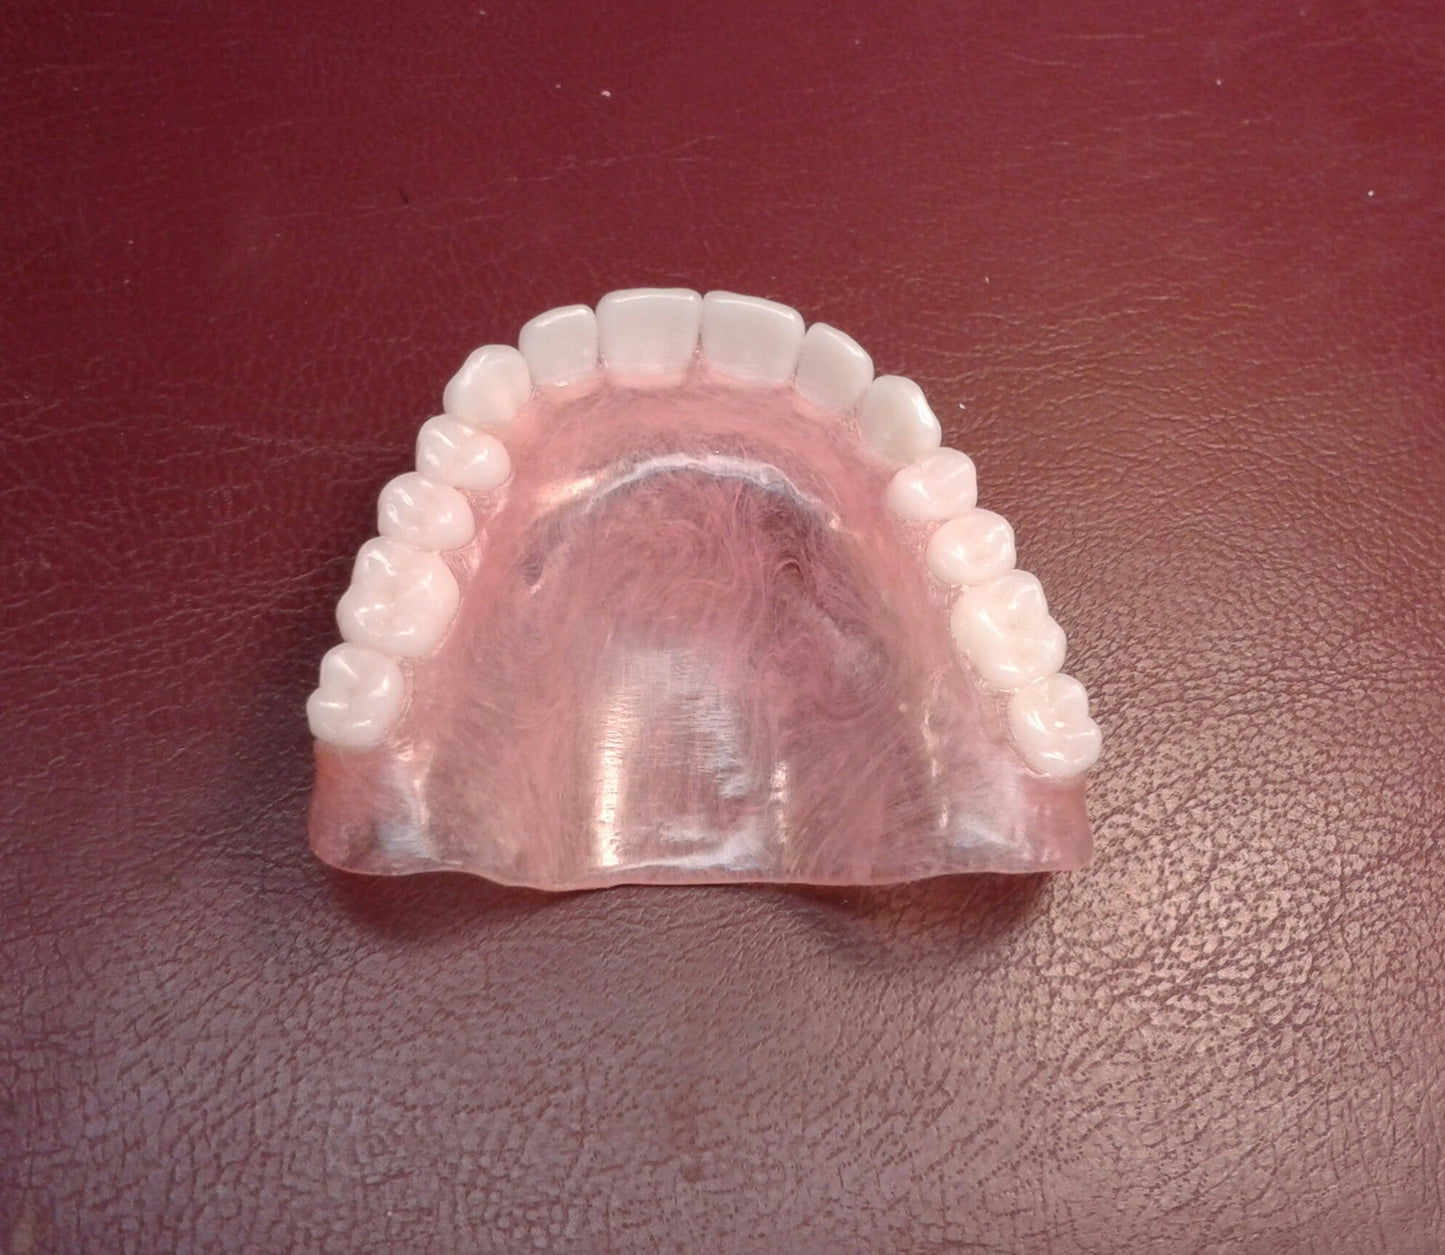 zUltra-thin upper denture, acrylic lower partial, horseshoe palate, wax try-in, shipping (x2), upper impression